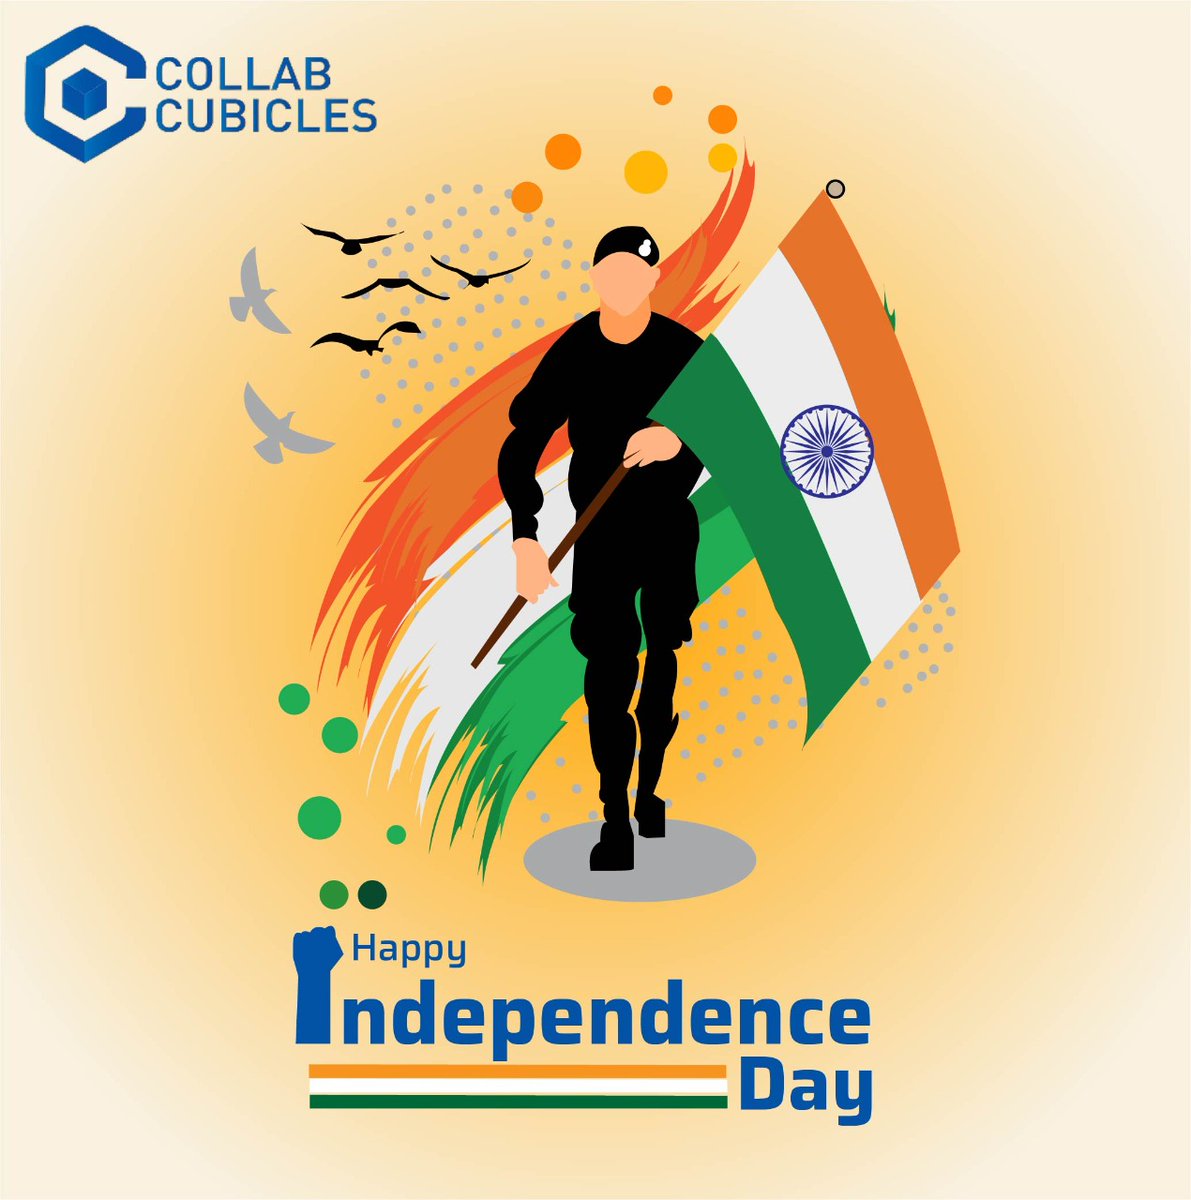 Happy Independence Day 🇮🇳

#collabcubicles #collaboration #createyourfuture #independenceday2022 #independencedaycelebration #independencedayofindia #bangalore #Whitefield #coworking #coworkingspace #coworkingcommunity #coworkspace #coworkingoffice